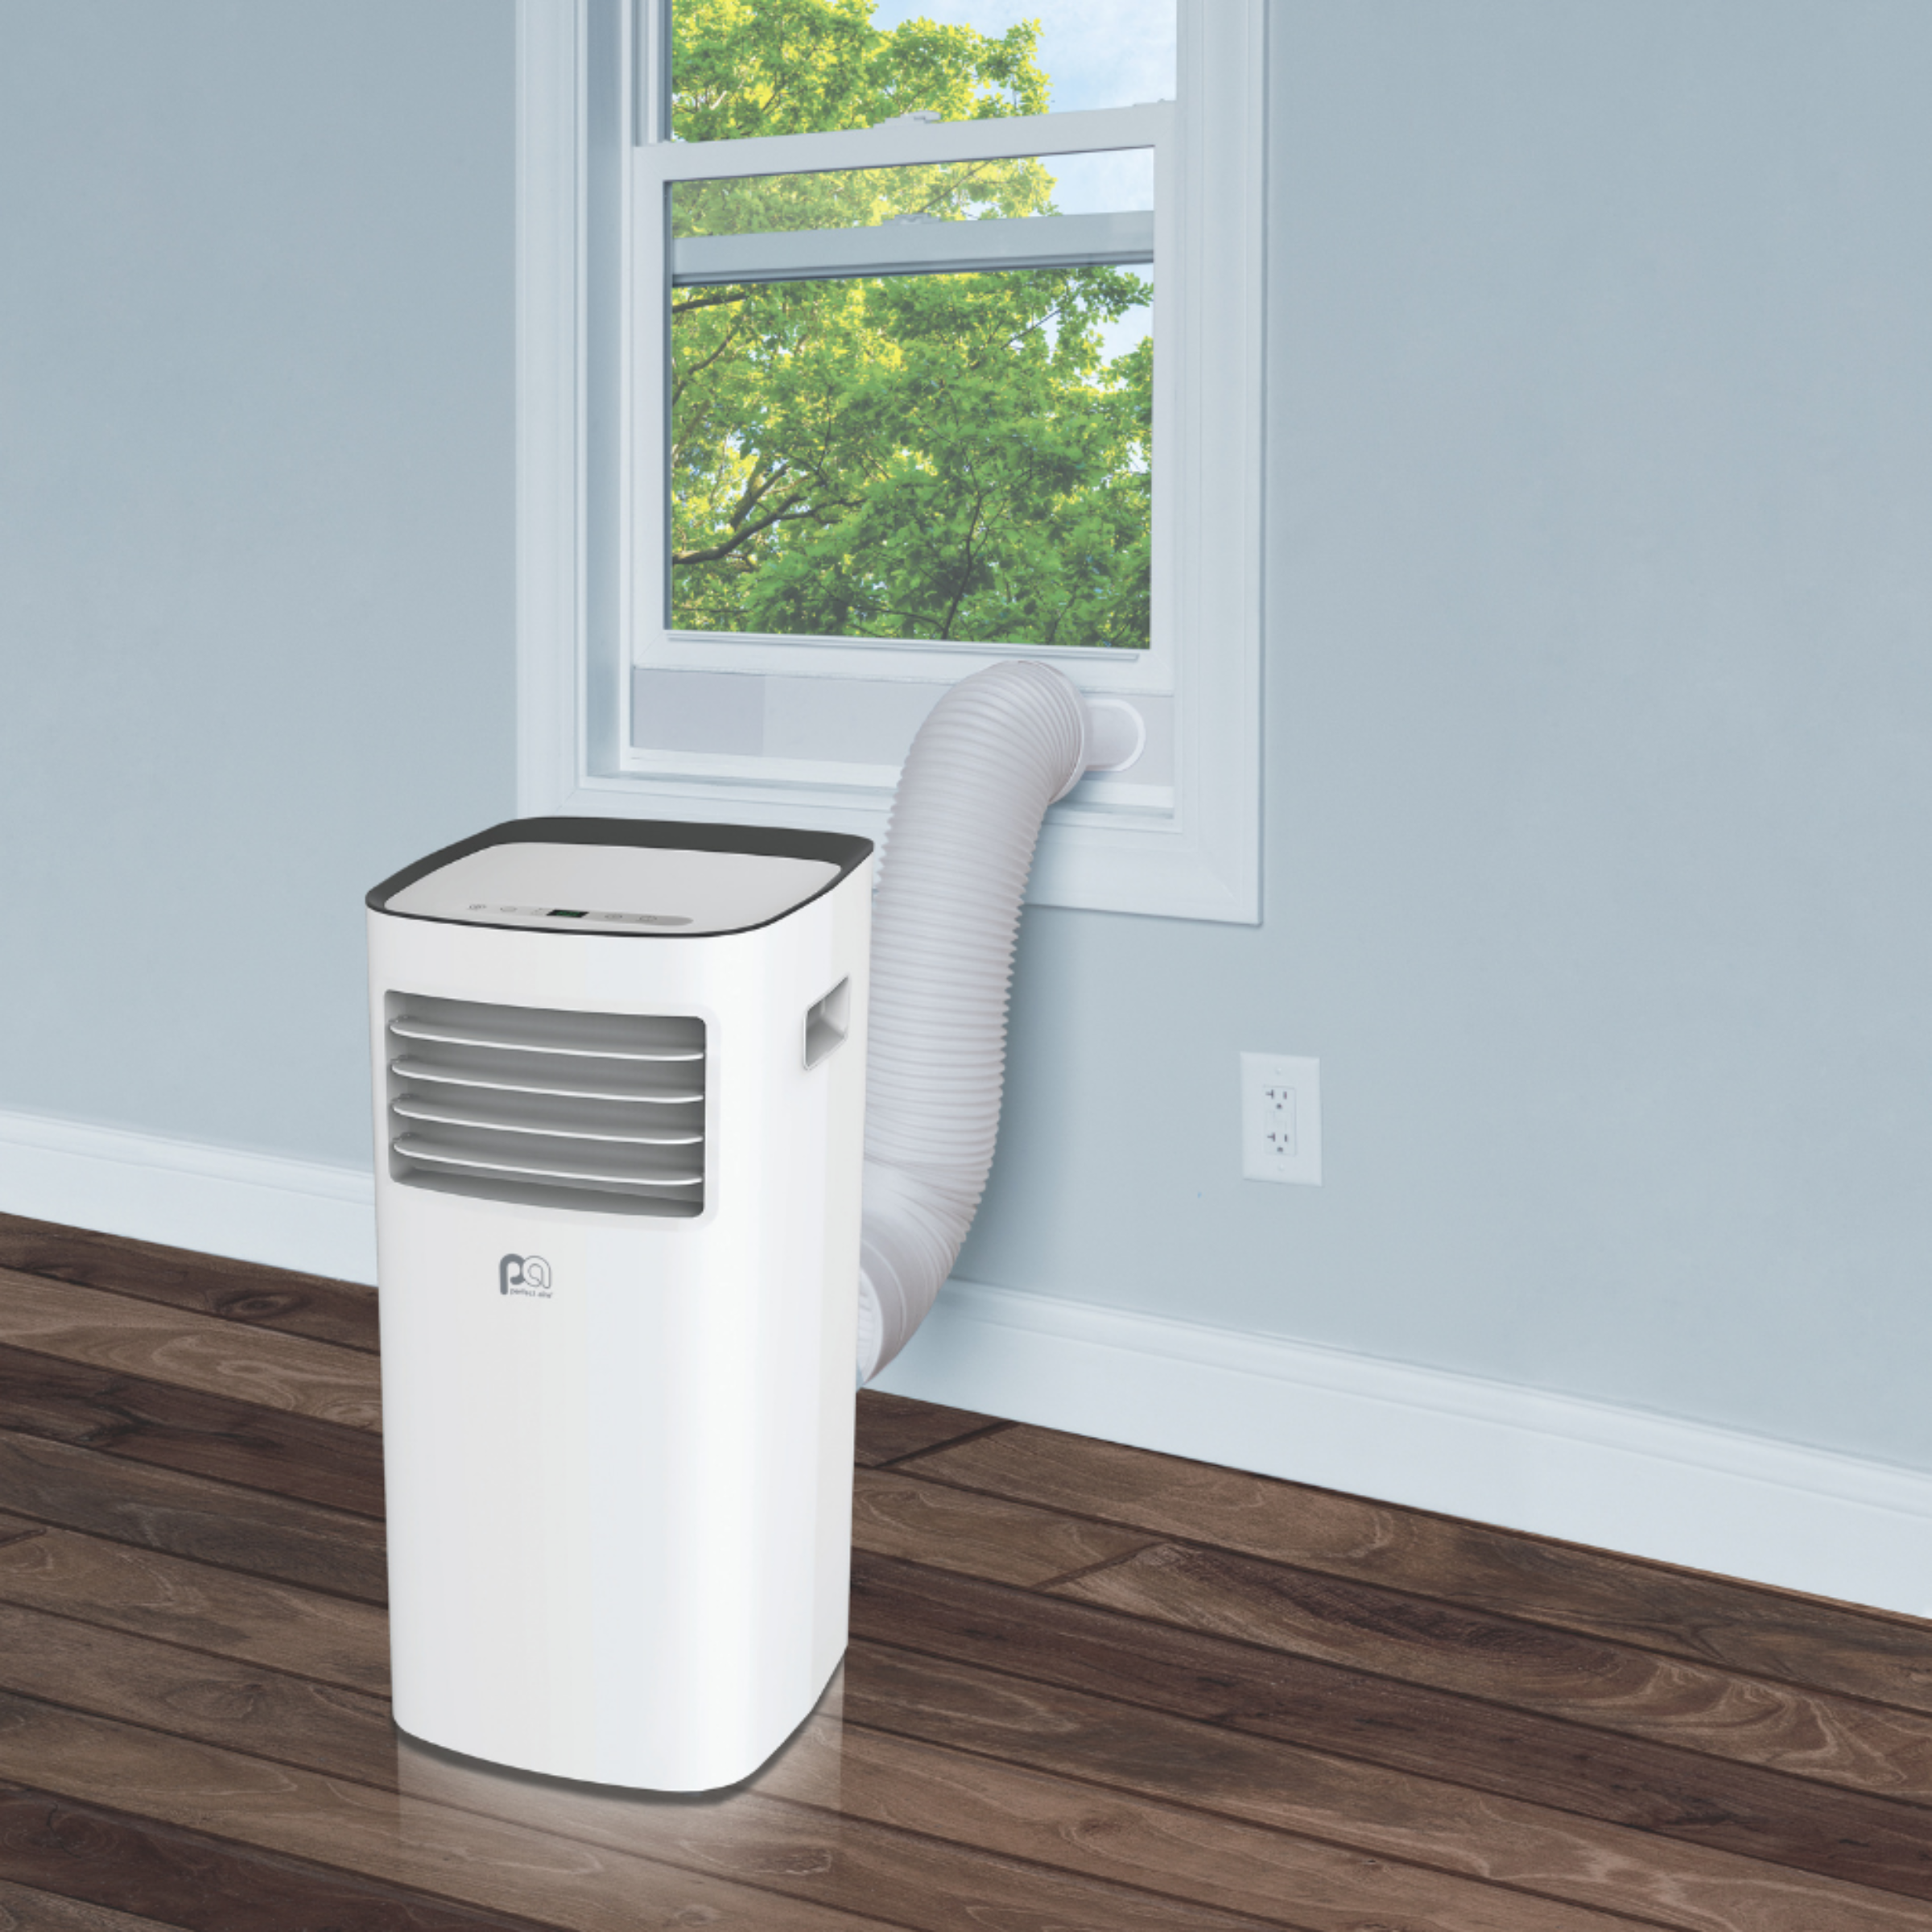 2PORT9000A Perfect Aire 9,000 BTU Compact Portable Air Conditioner - CEC, Sq. ft: 300-350 Coverage, With Remote Control, Non-Ozone Depleting R32 Refrigerant, EER = 10.57